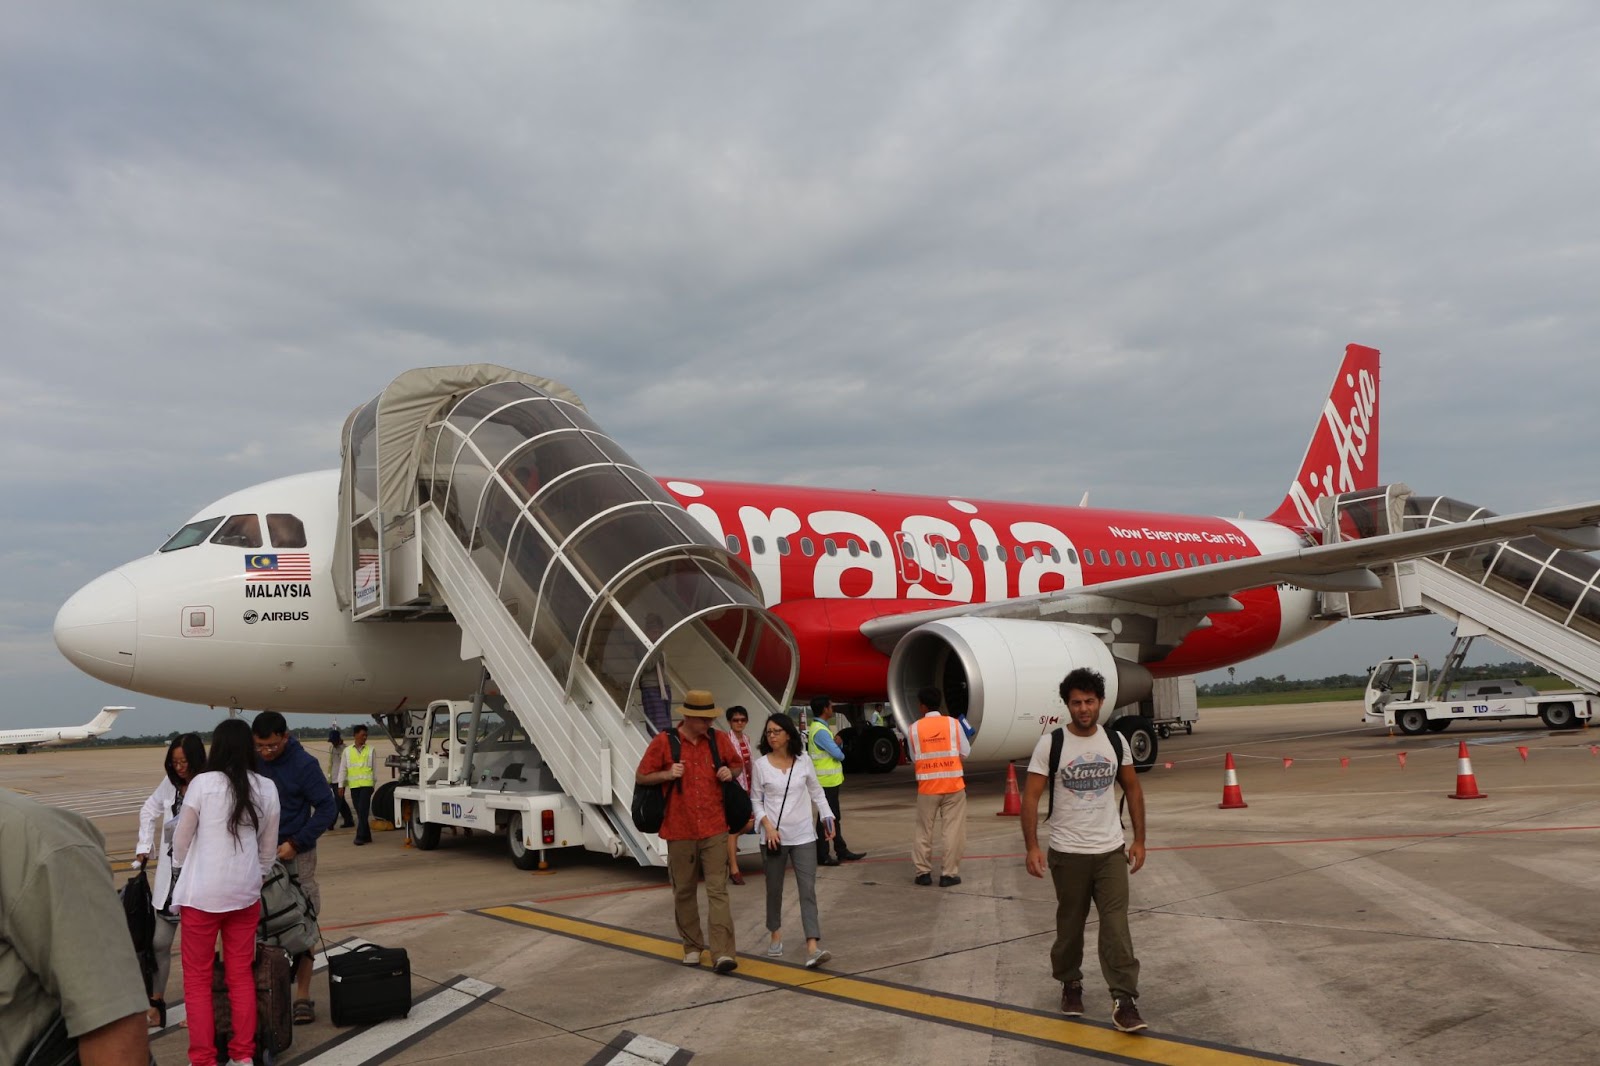 3 days in Siem Reap. We arrived on our Air Asia flight from Kuala Lumpur on a cloudy day at Siem Reap.